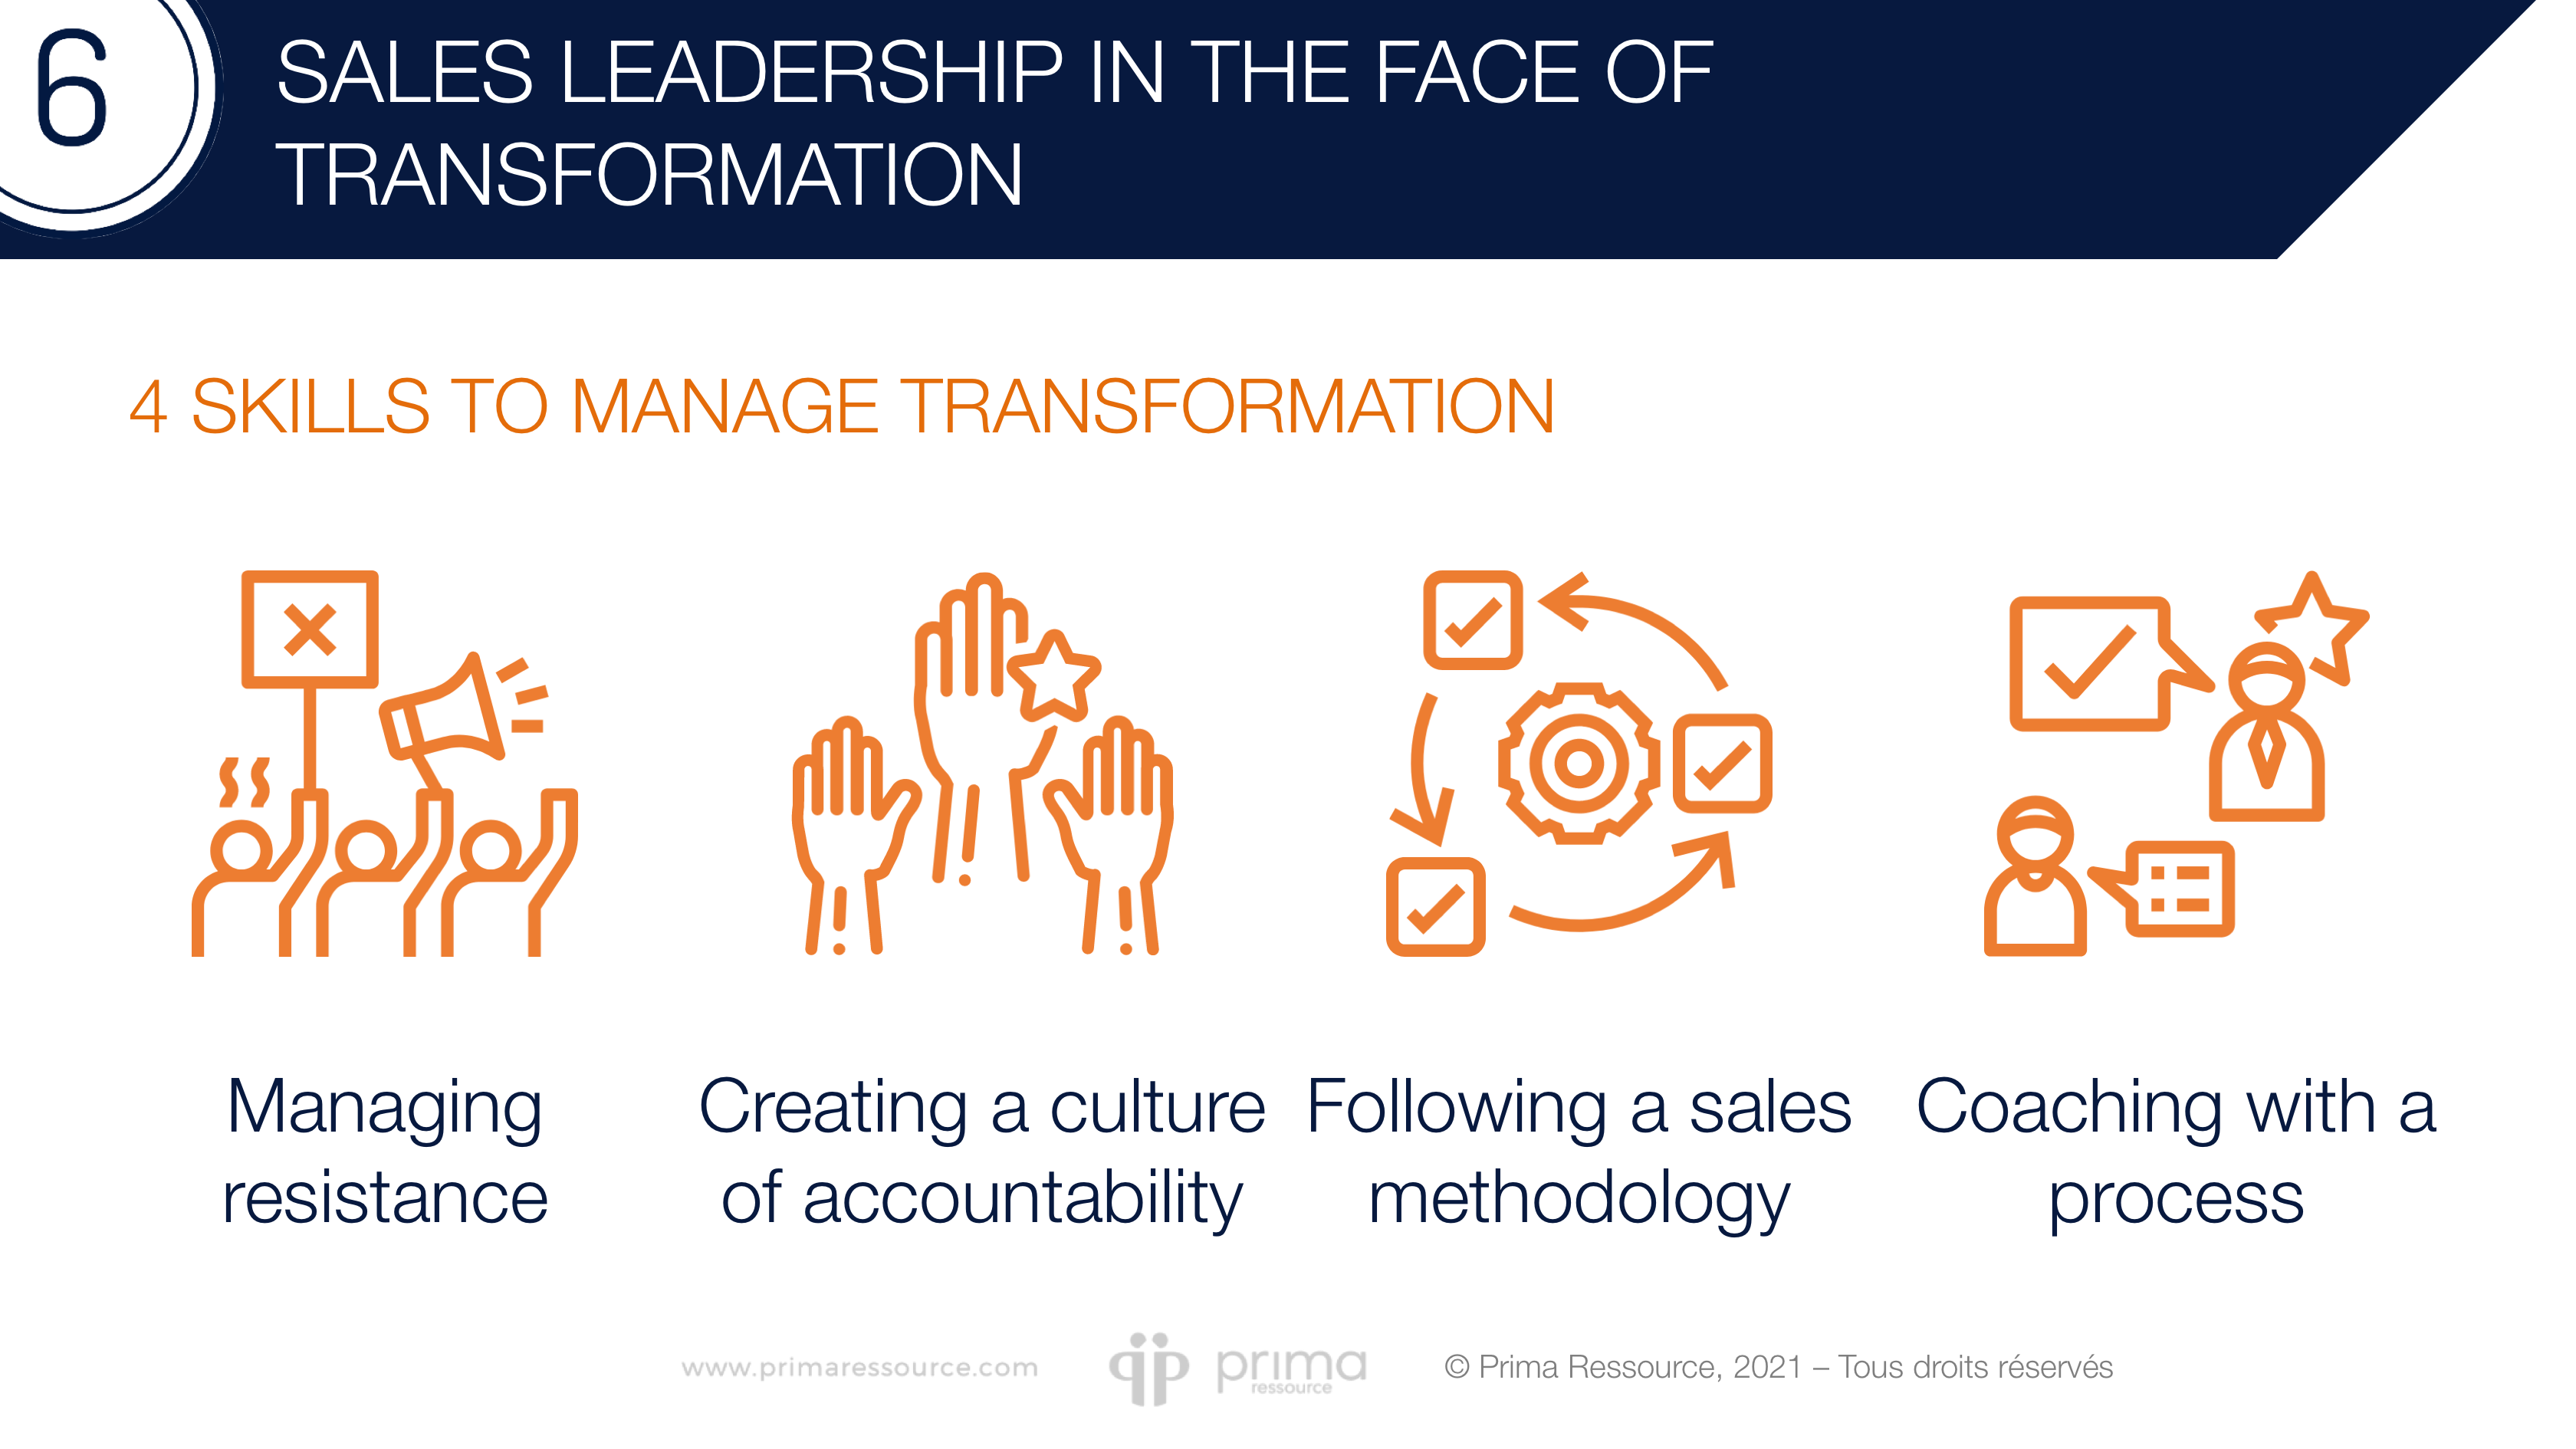 SALES LEADERSHIP IN THE FACE OF TRANSFORMATION